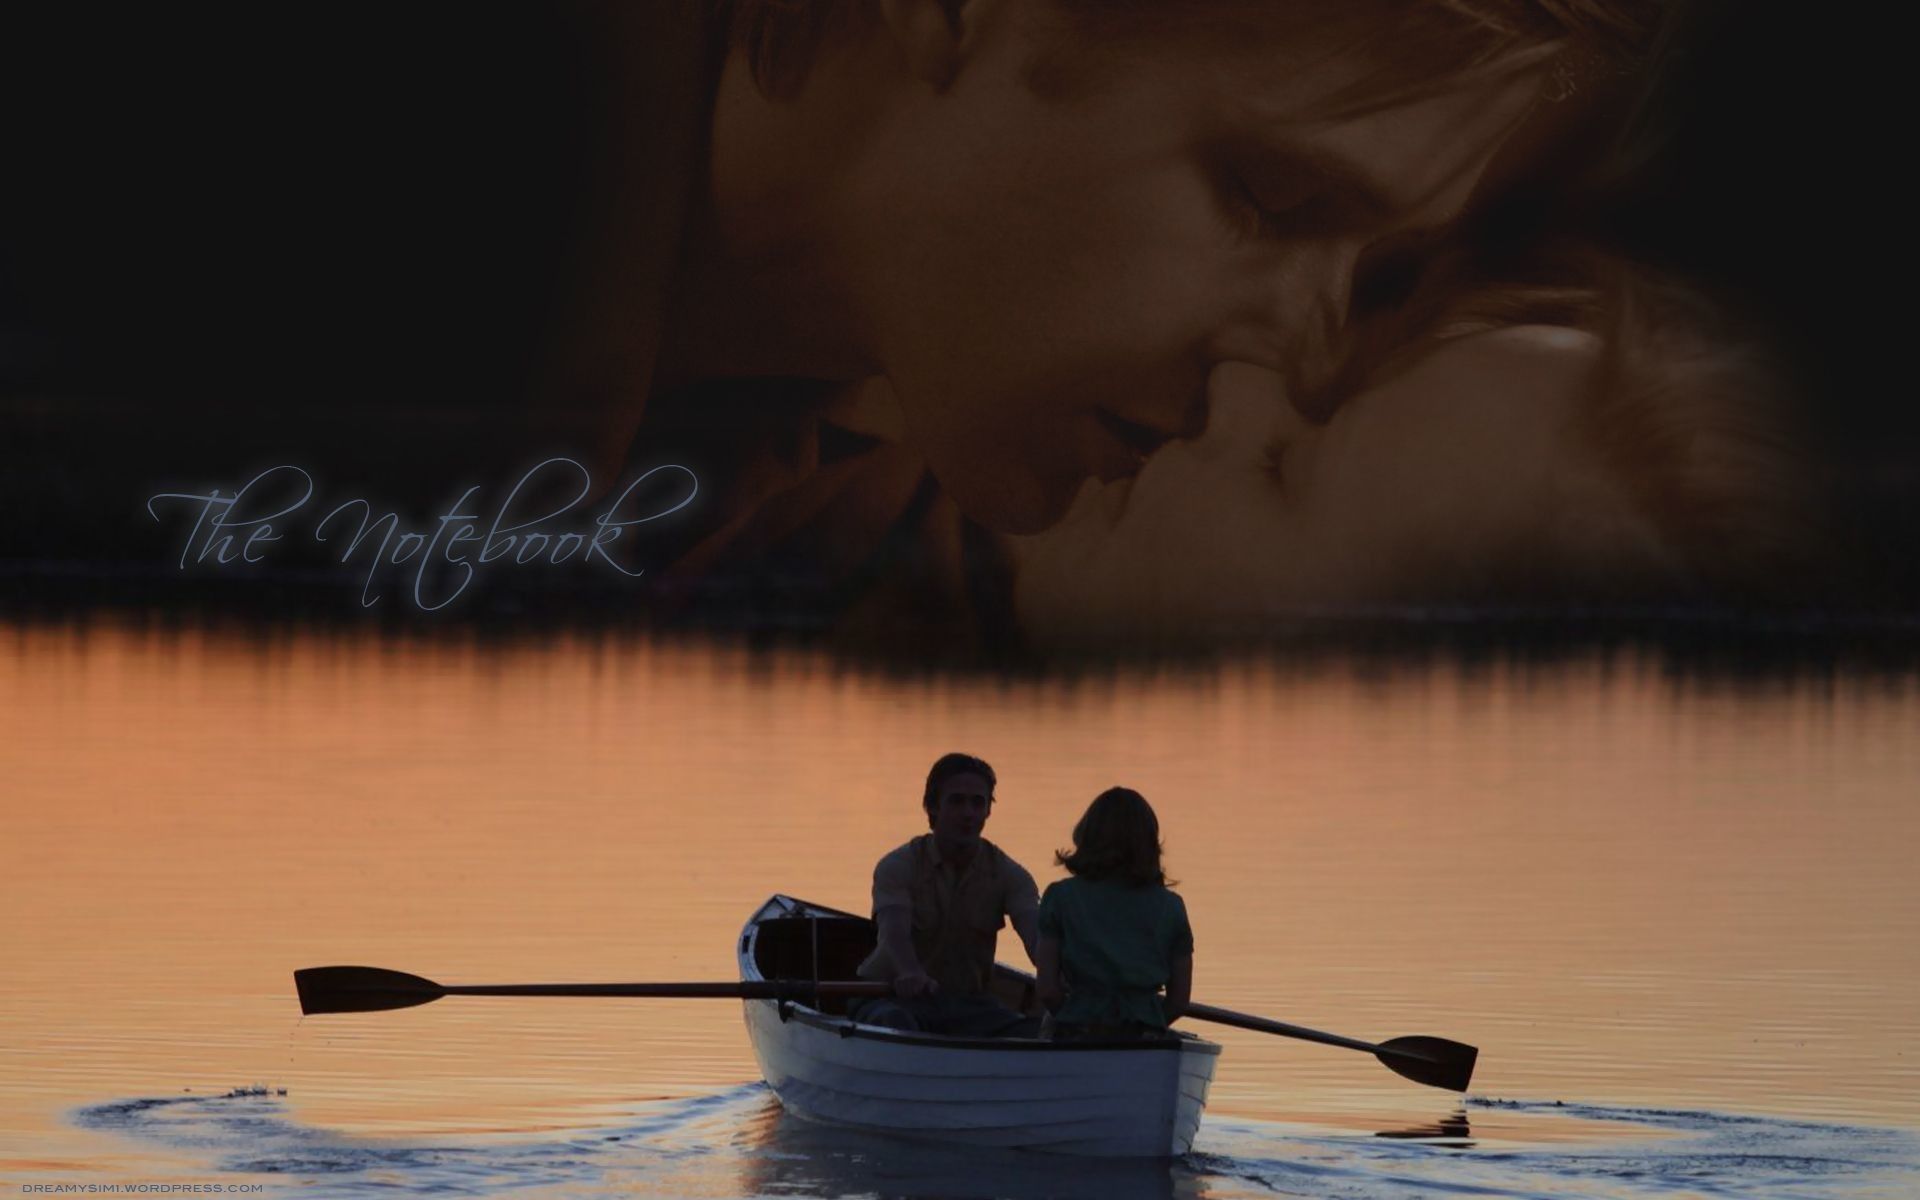 The Notebook Wallpaper Free The Notebook Background